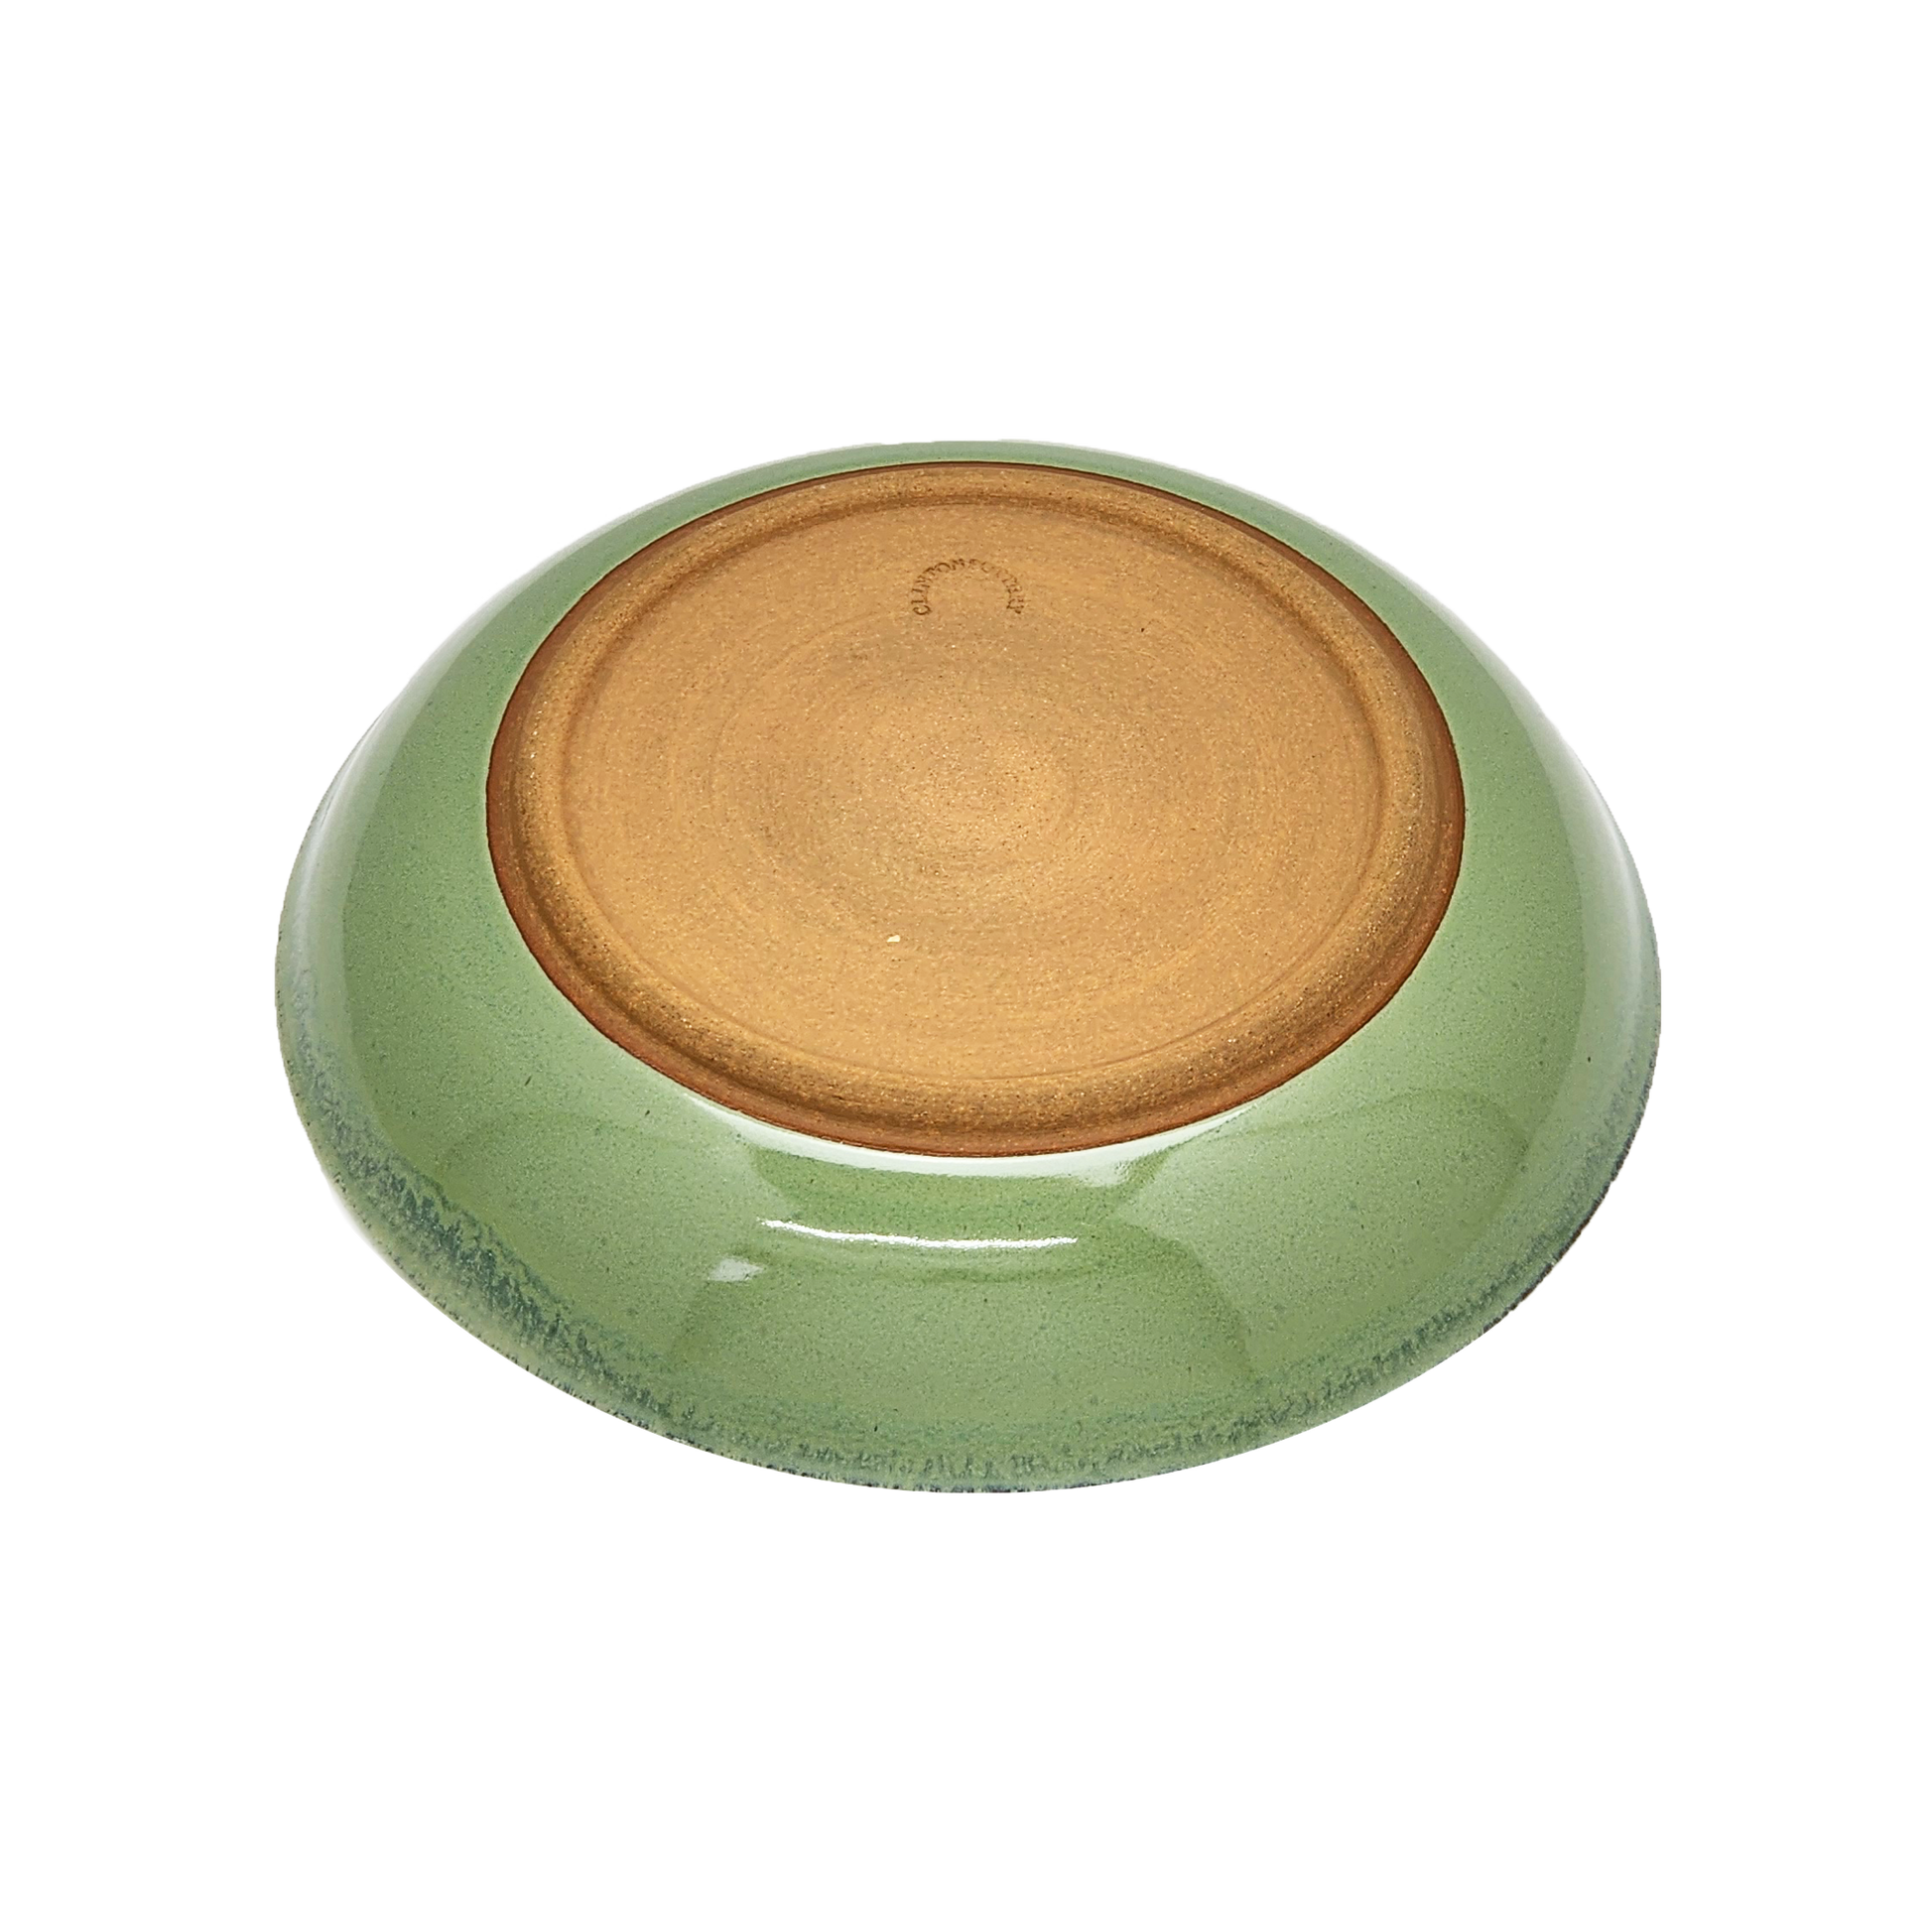 Image: A large pasta dish with a diameter of 10 inches, meticulously crafted by Clinton Pottery, featuring a refreshing bud green glaze. The vibrant green color of the glaze adds a lively touch to the dish, making it an inviting choice for serving pasta dishes with a hint of natural charm.